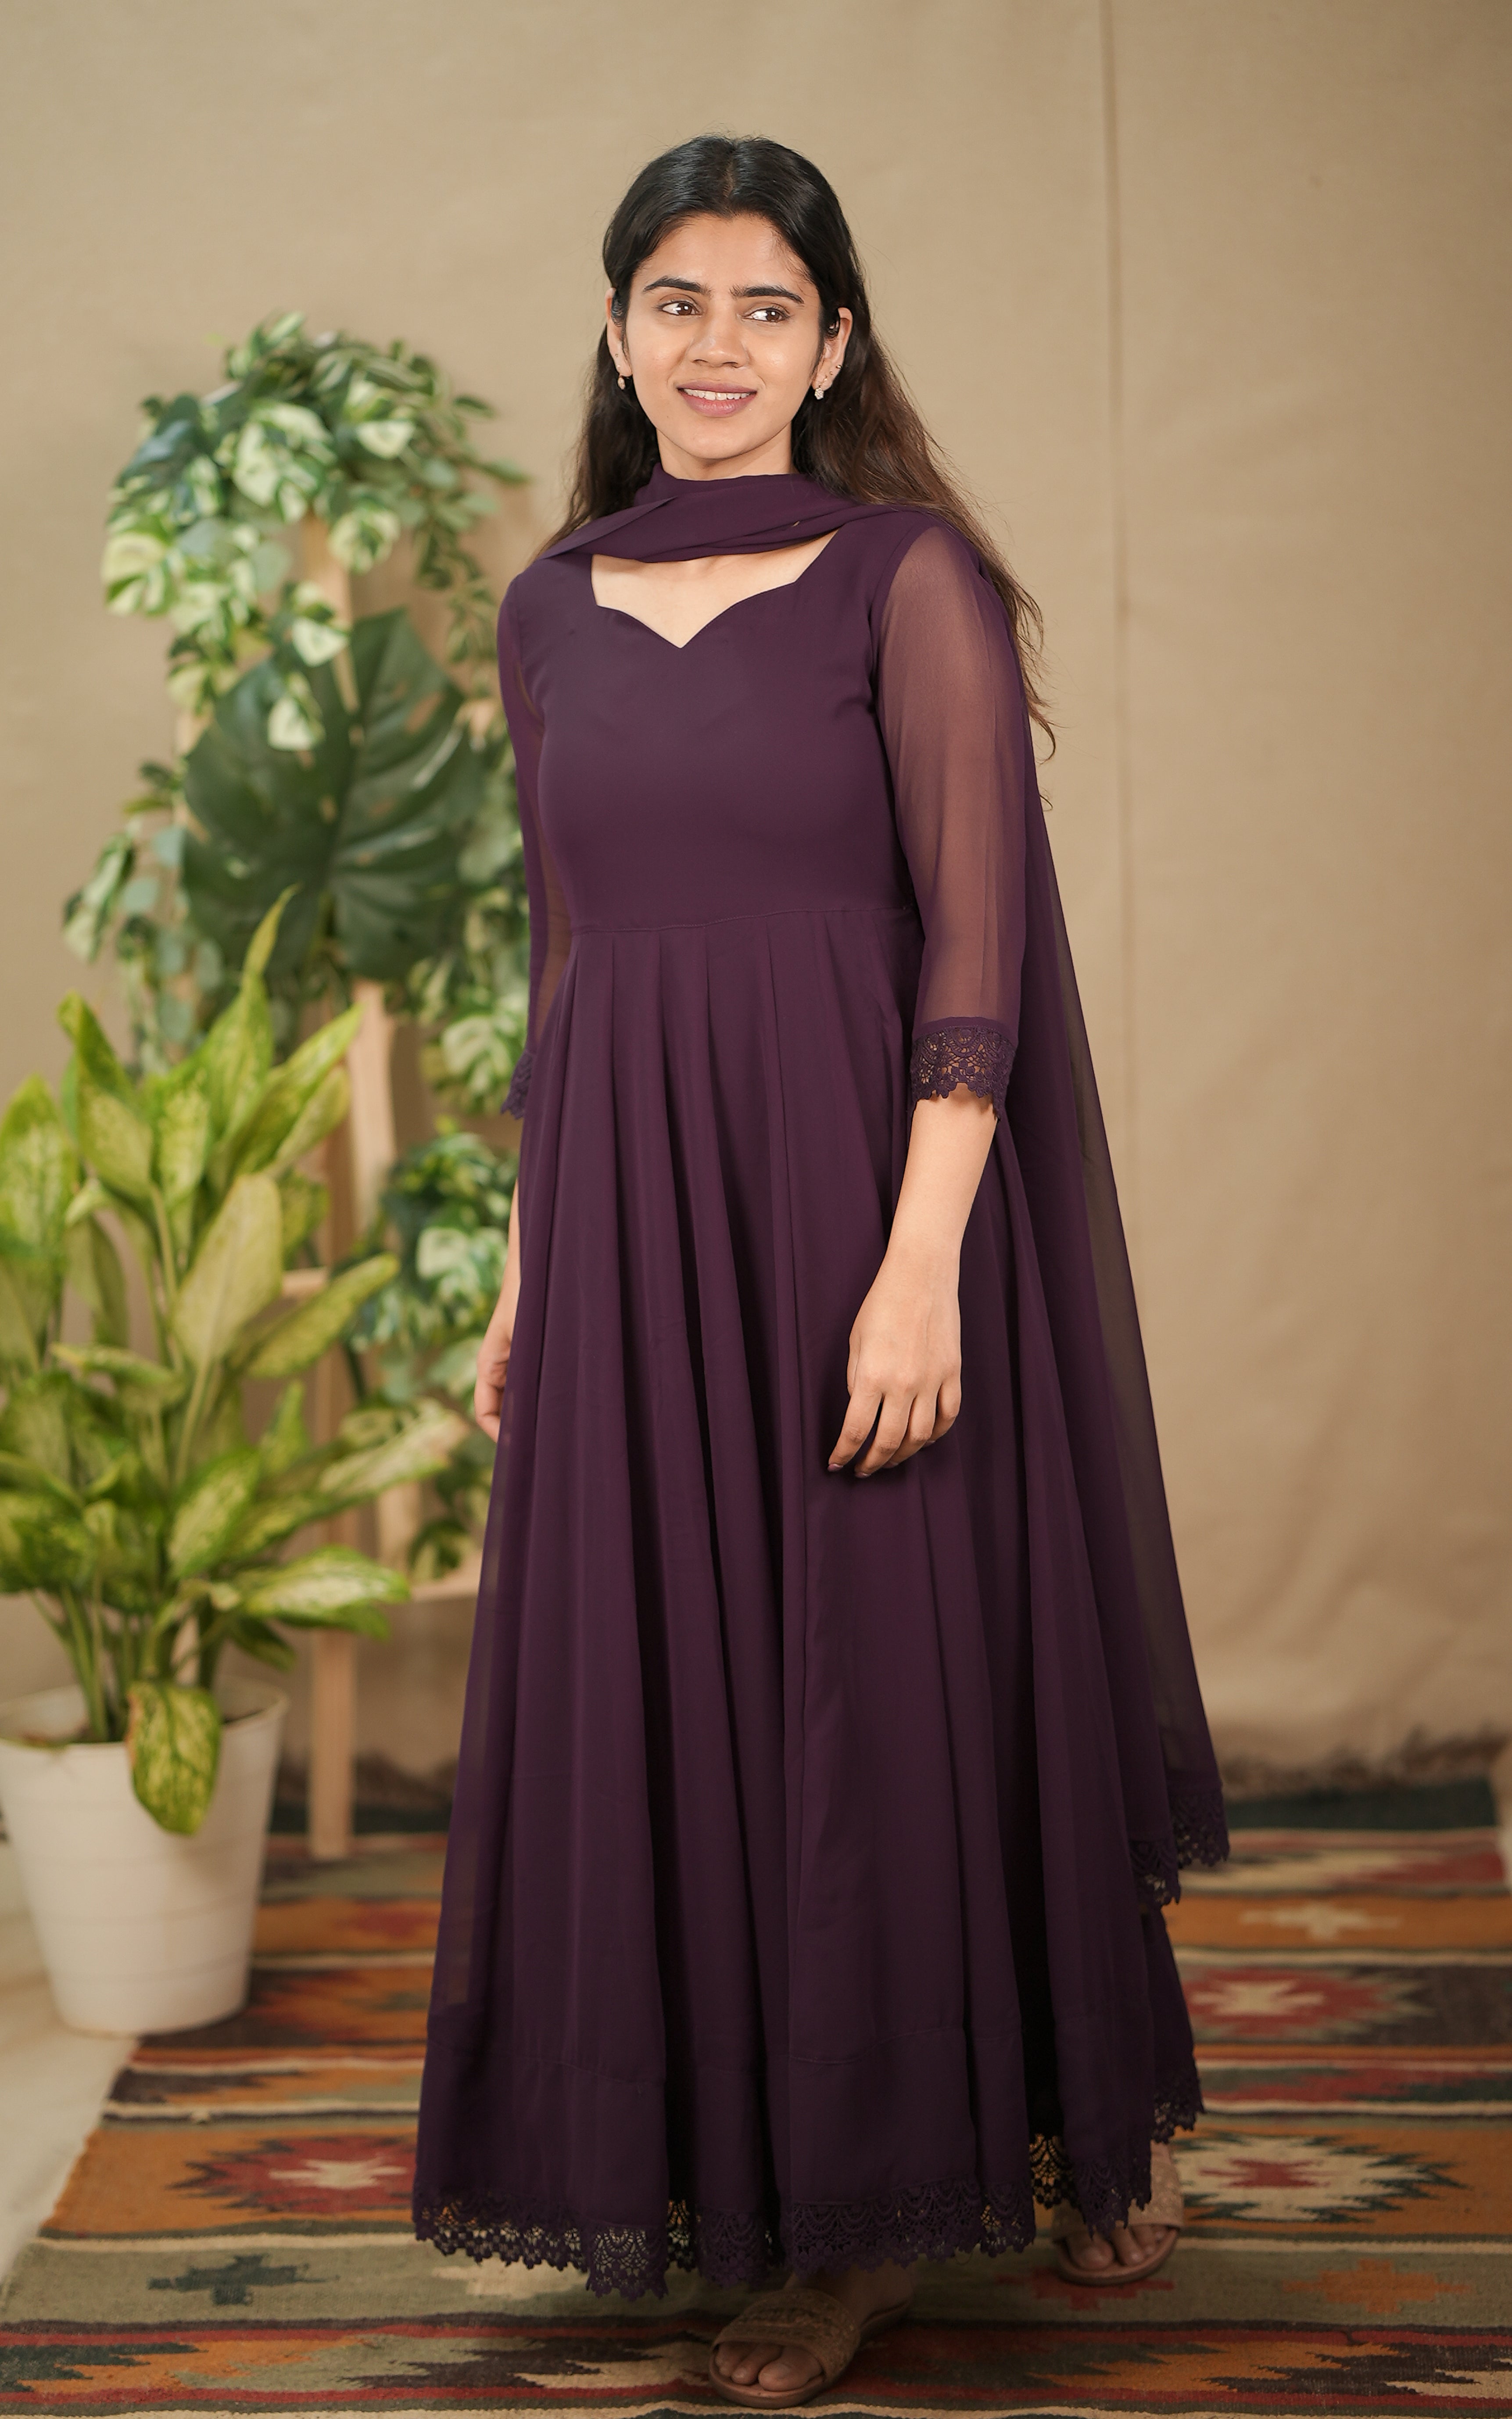 instore kurti set georgette with butter crepe lining full flared anarkali with crochet lace border color: plum